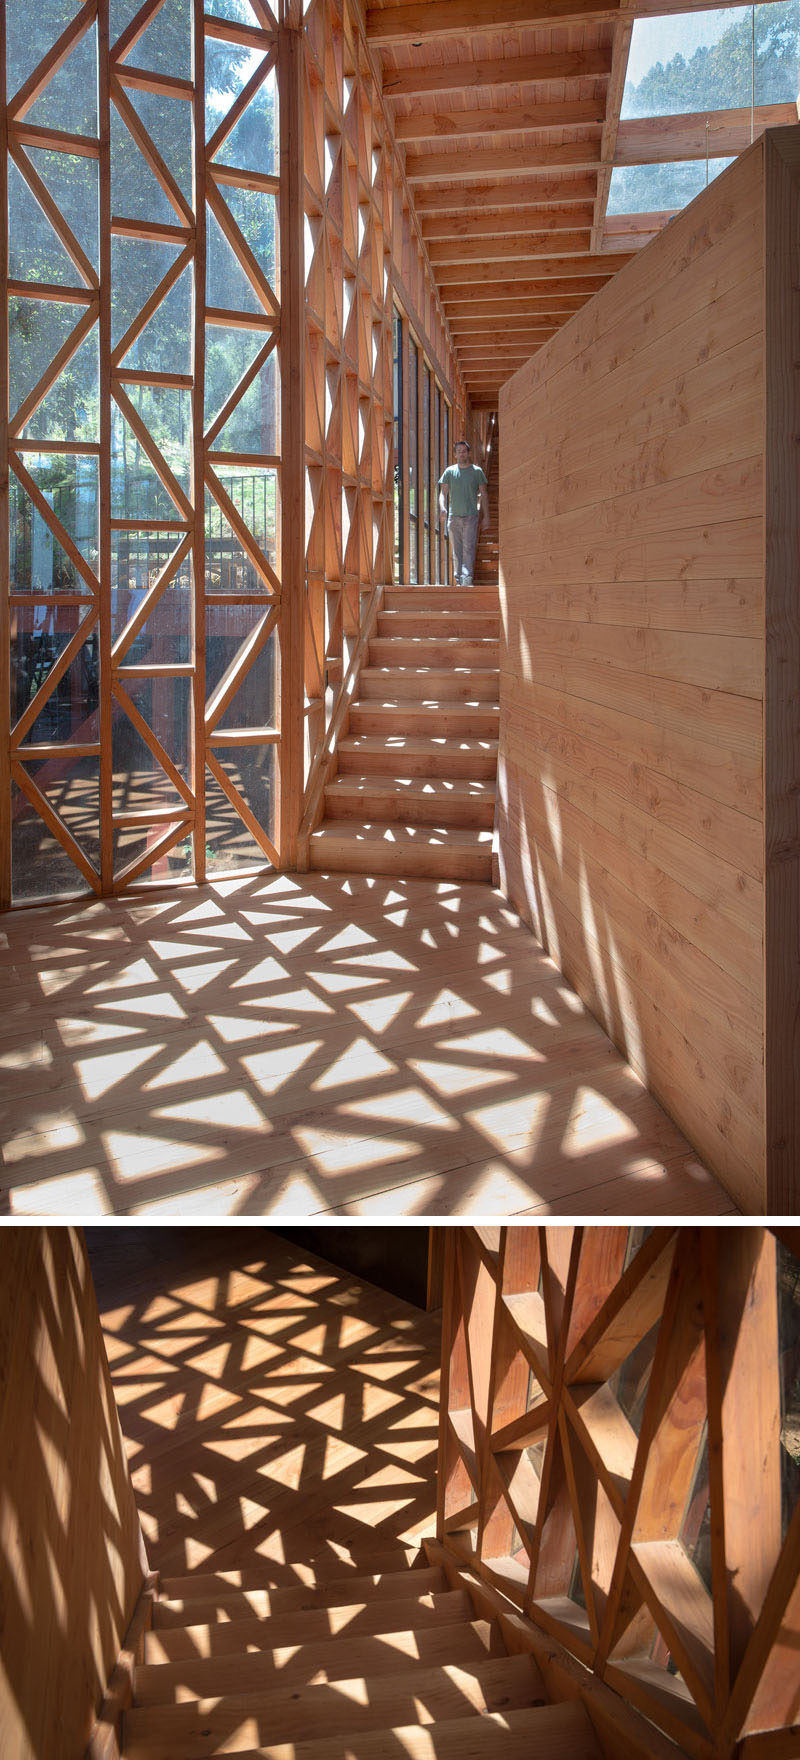 The windows next to these steps provide an interesting pattern when the sun shines on them.